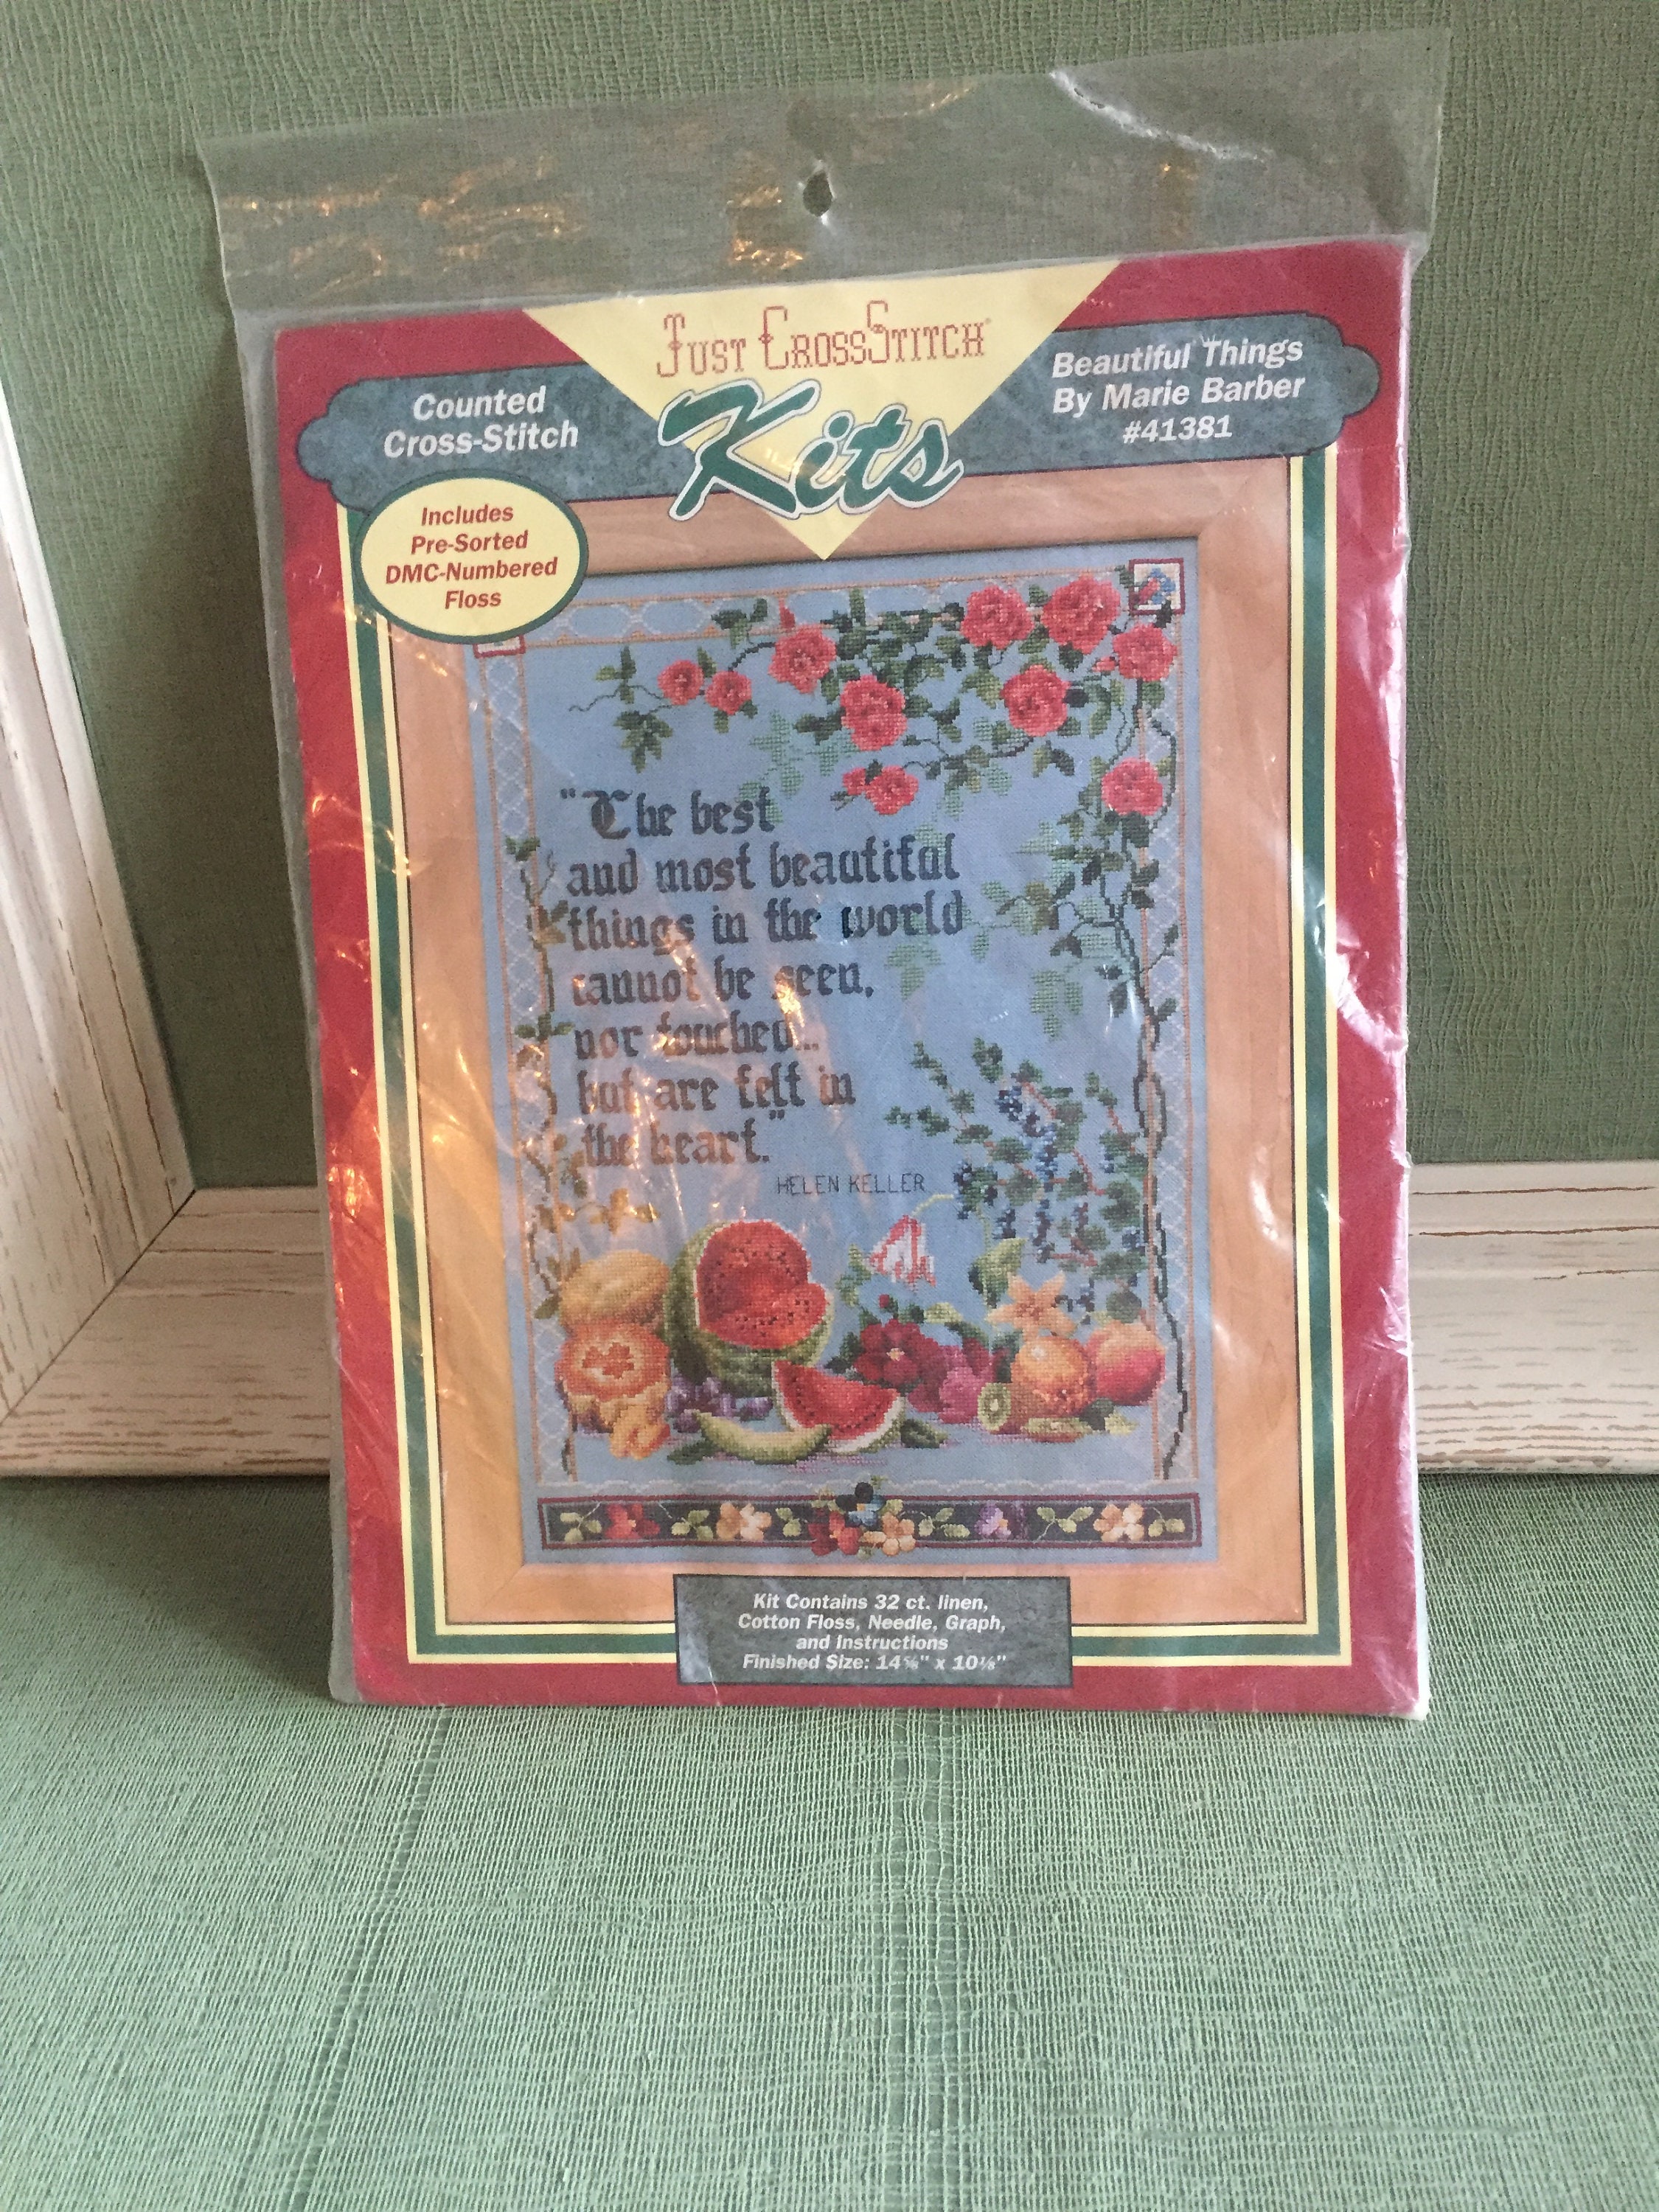 Fruit Mandala Counted Cross Stitch Kit 6 Inch Kit Suitable for Beginners 